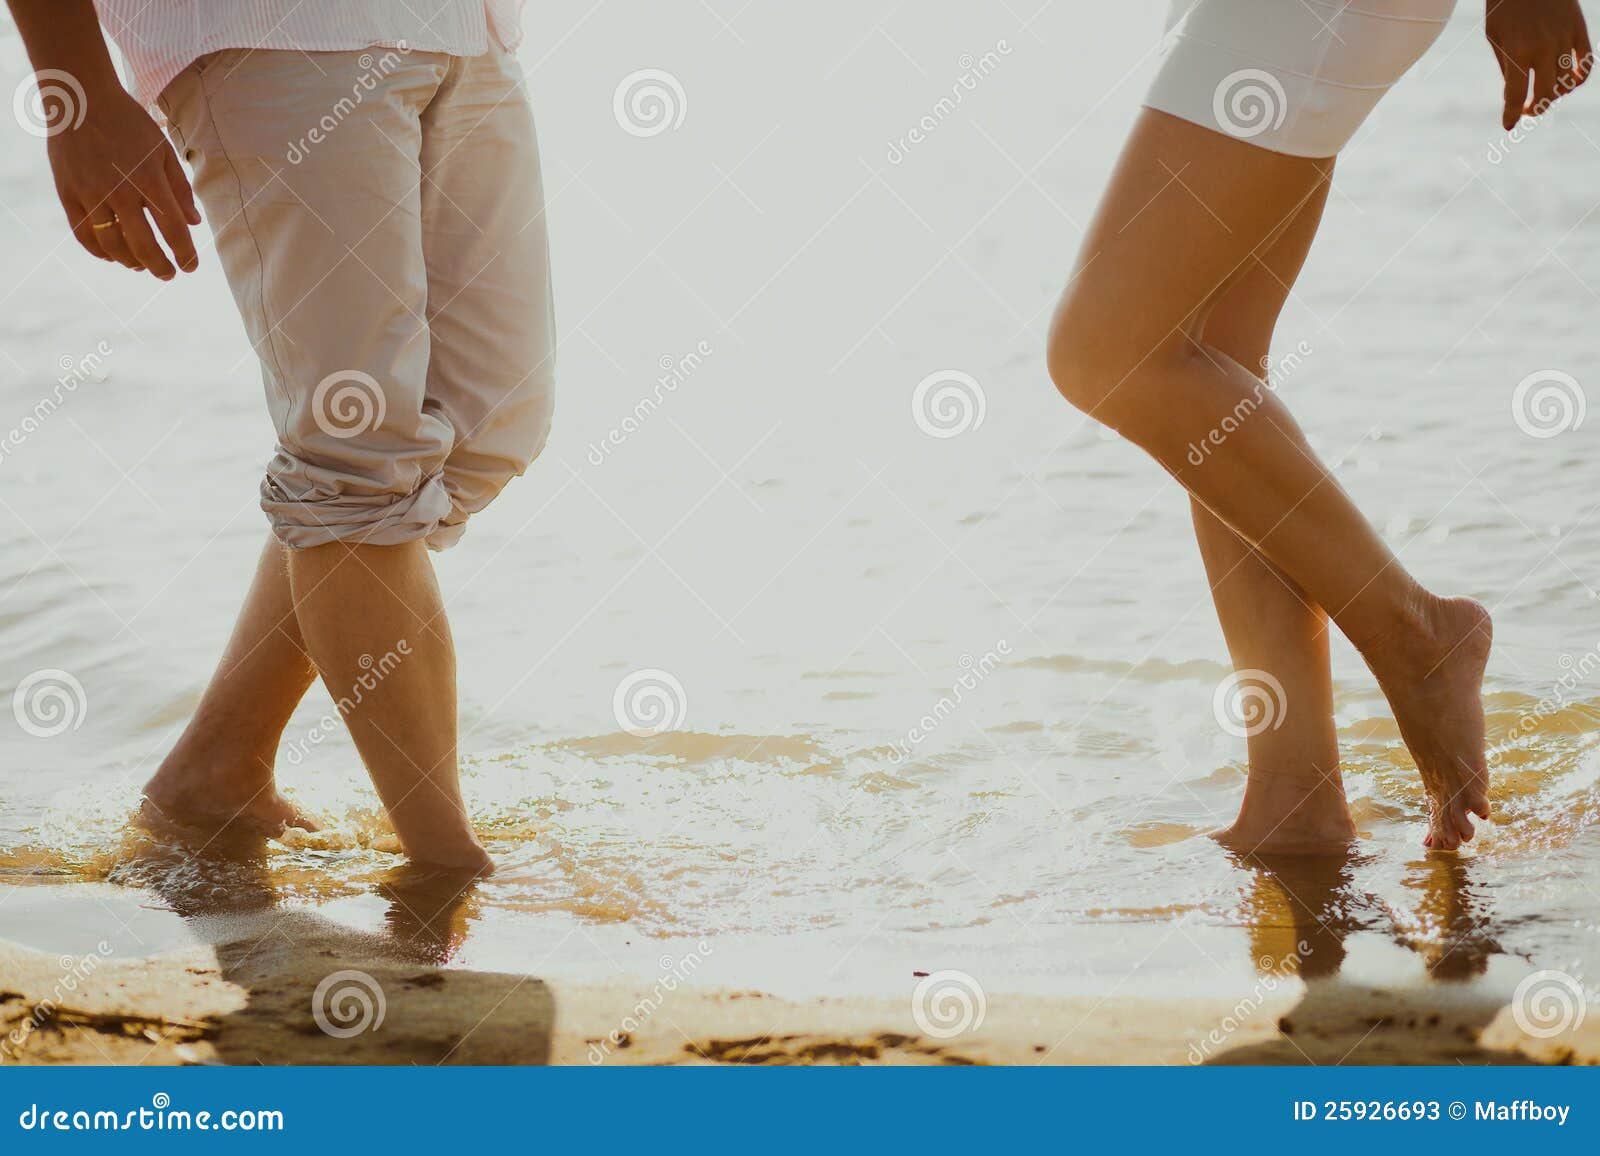 lovers couple in sea